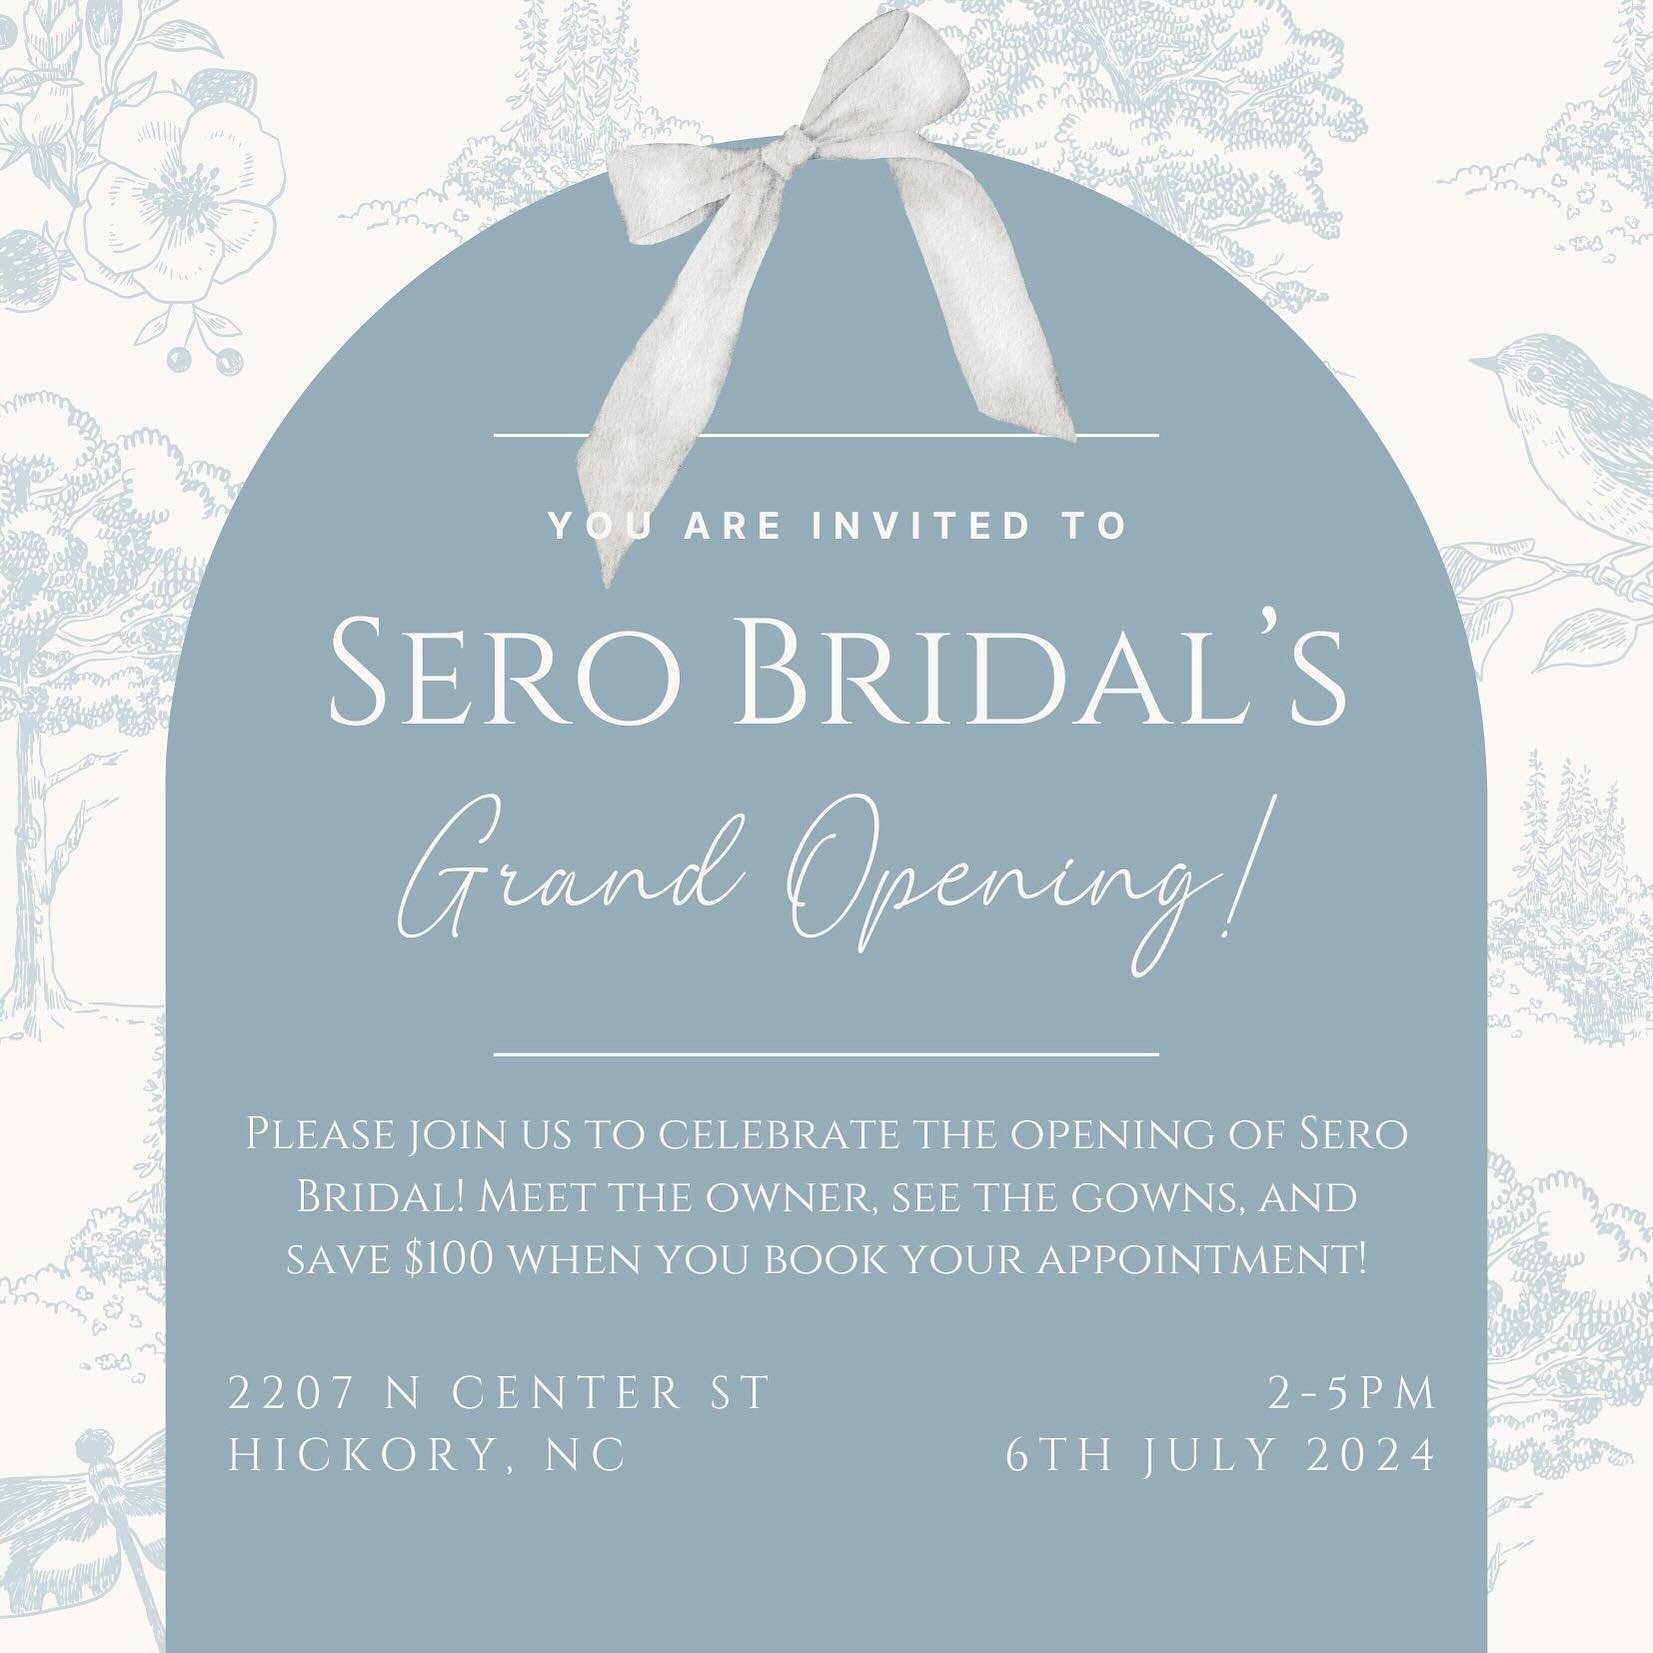 ✨ If you&rsquo;re reading this&hellip; You&rsquo;re invited!🍾

Calling all brides, wedding vendors, curious people, etc to come join us at the Sero Bridal grand opening party!

Mark your calendars for July 6th between 2 and 5 pm to come meet me, see